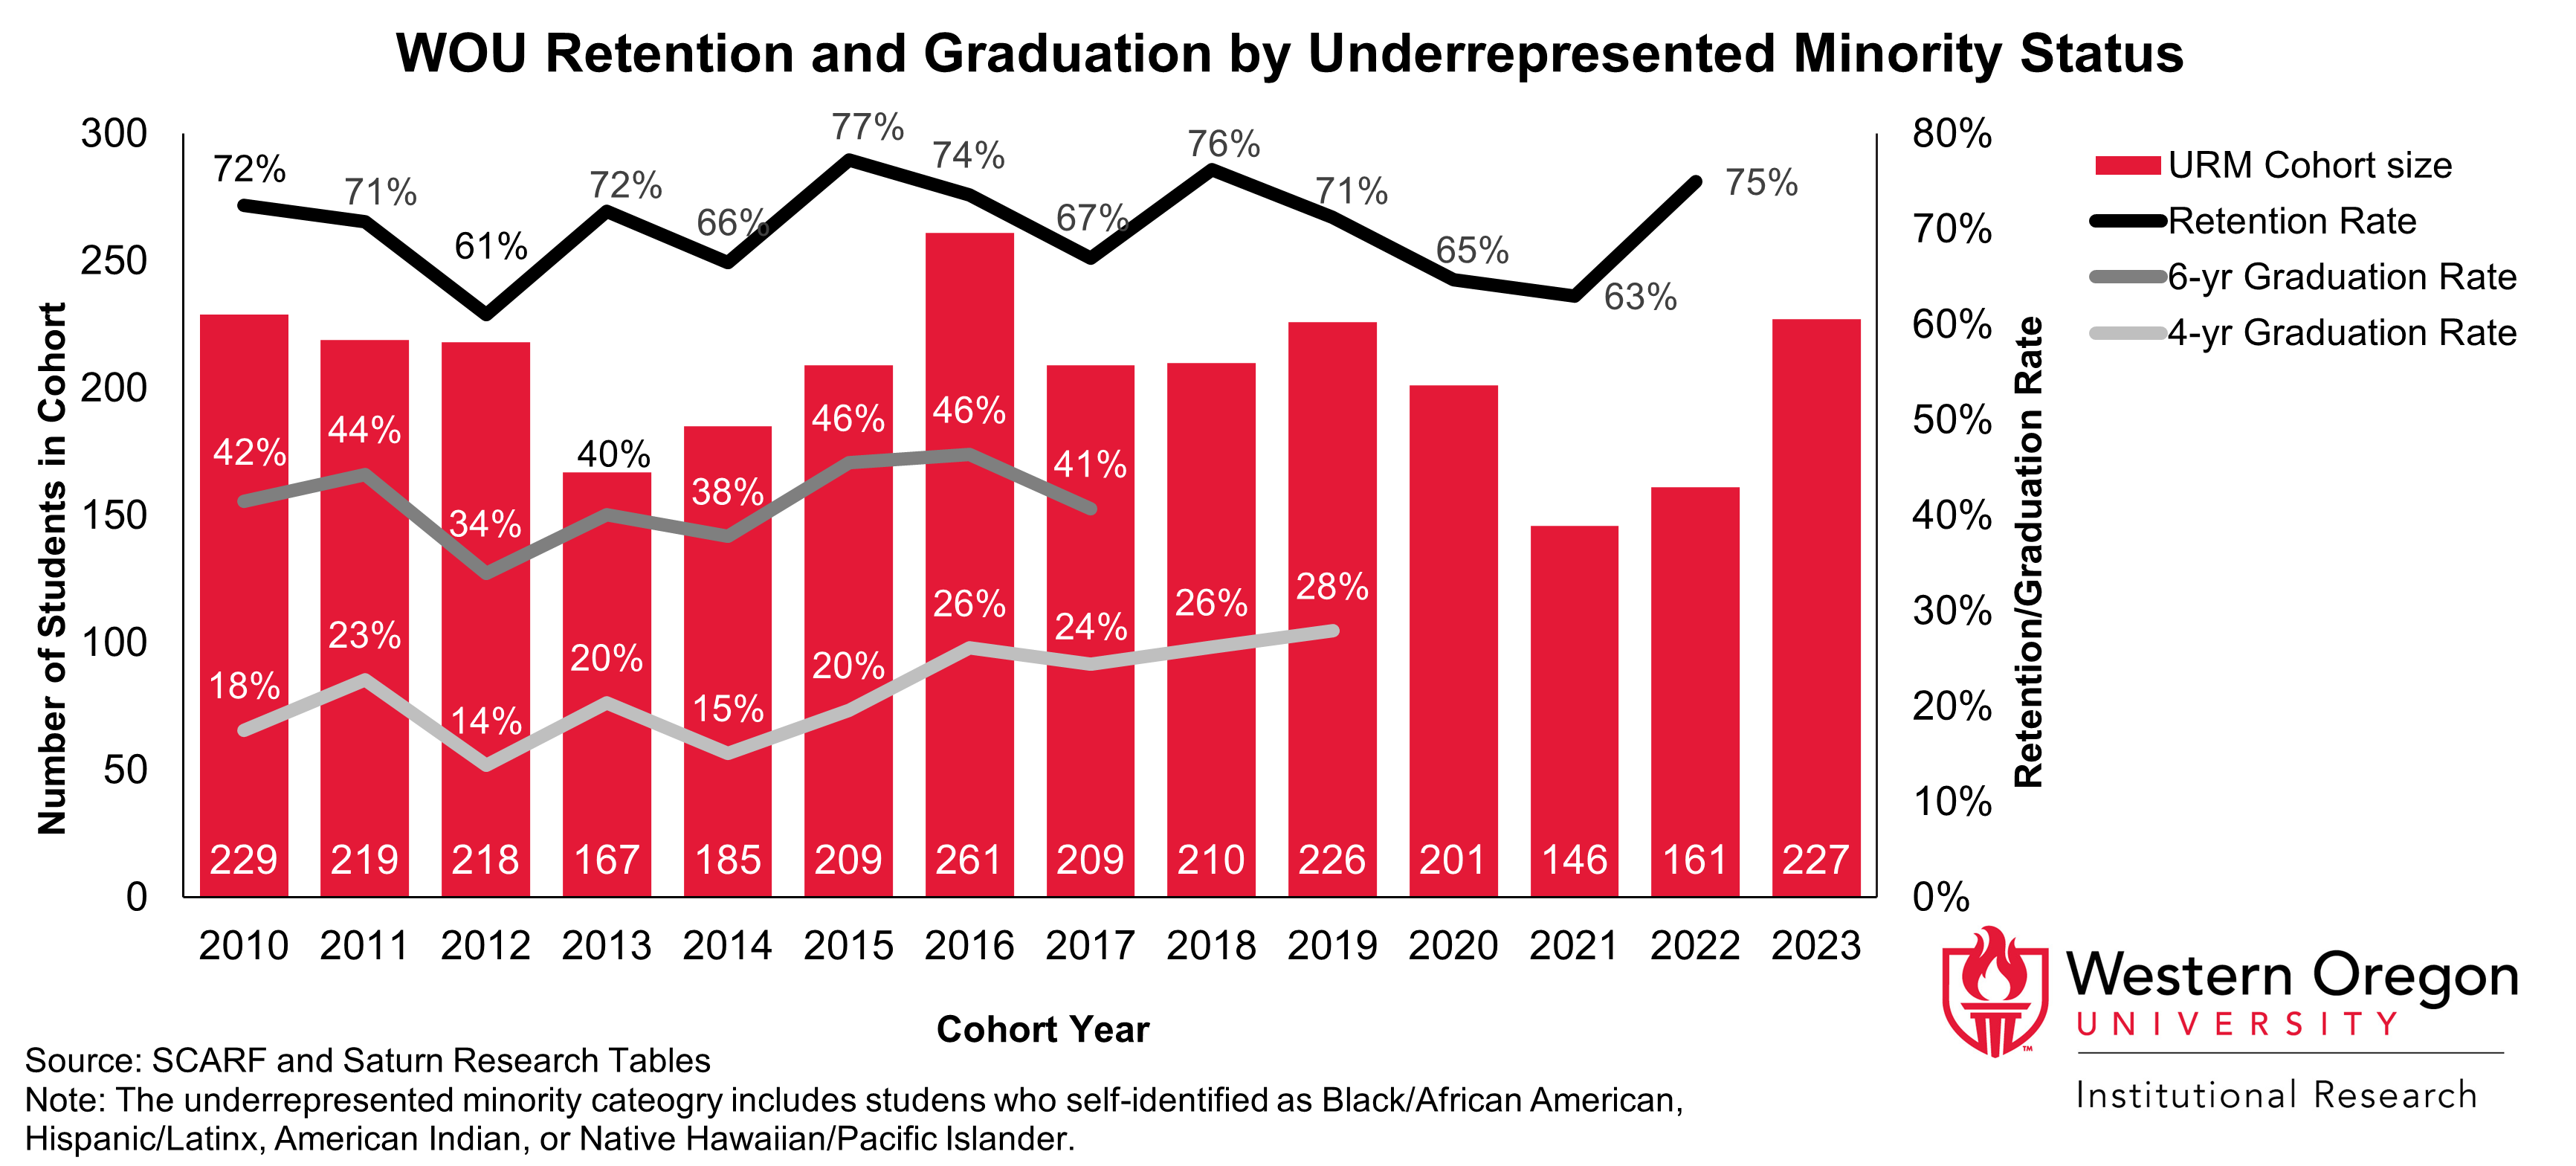 Bar and line graph of retention and 4- and 6-year graduation rates since 2010 for WOU students from underrepresented minority groups, showing that 4-year graduation rates and retention rates have increased overall.